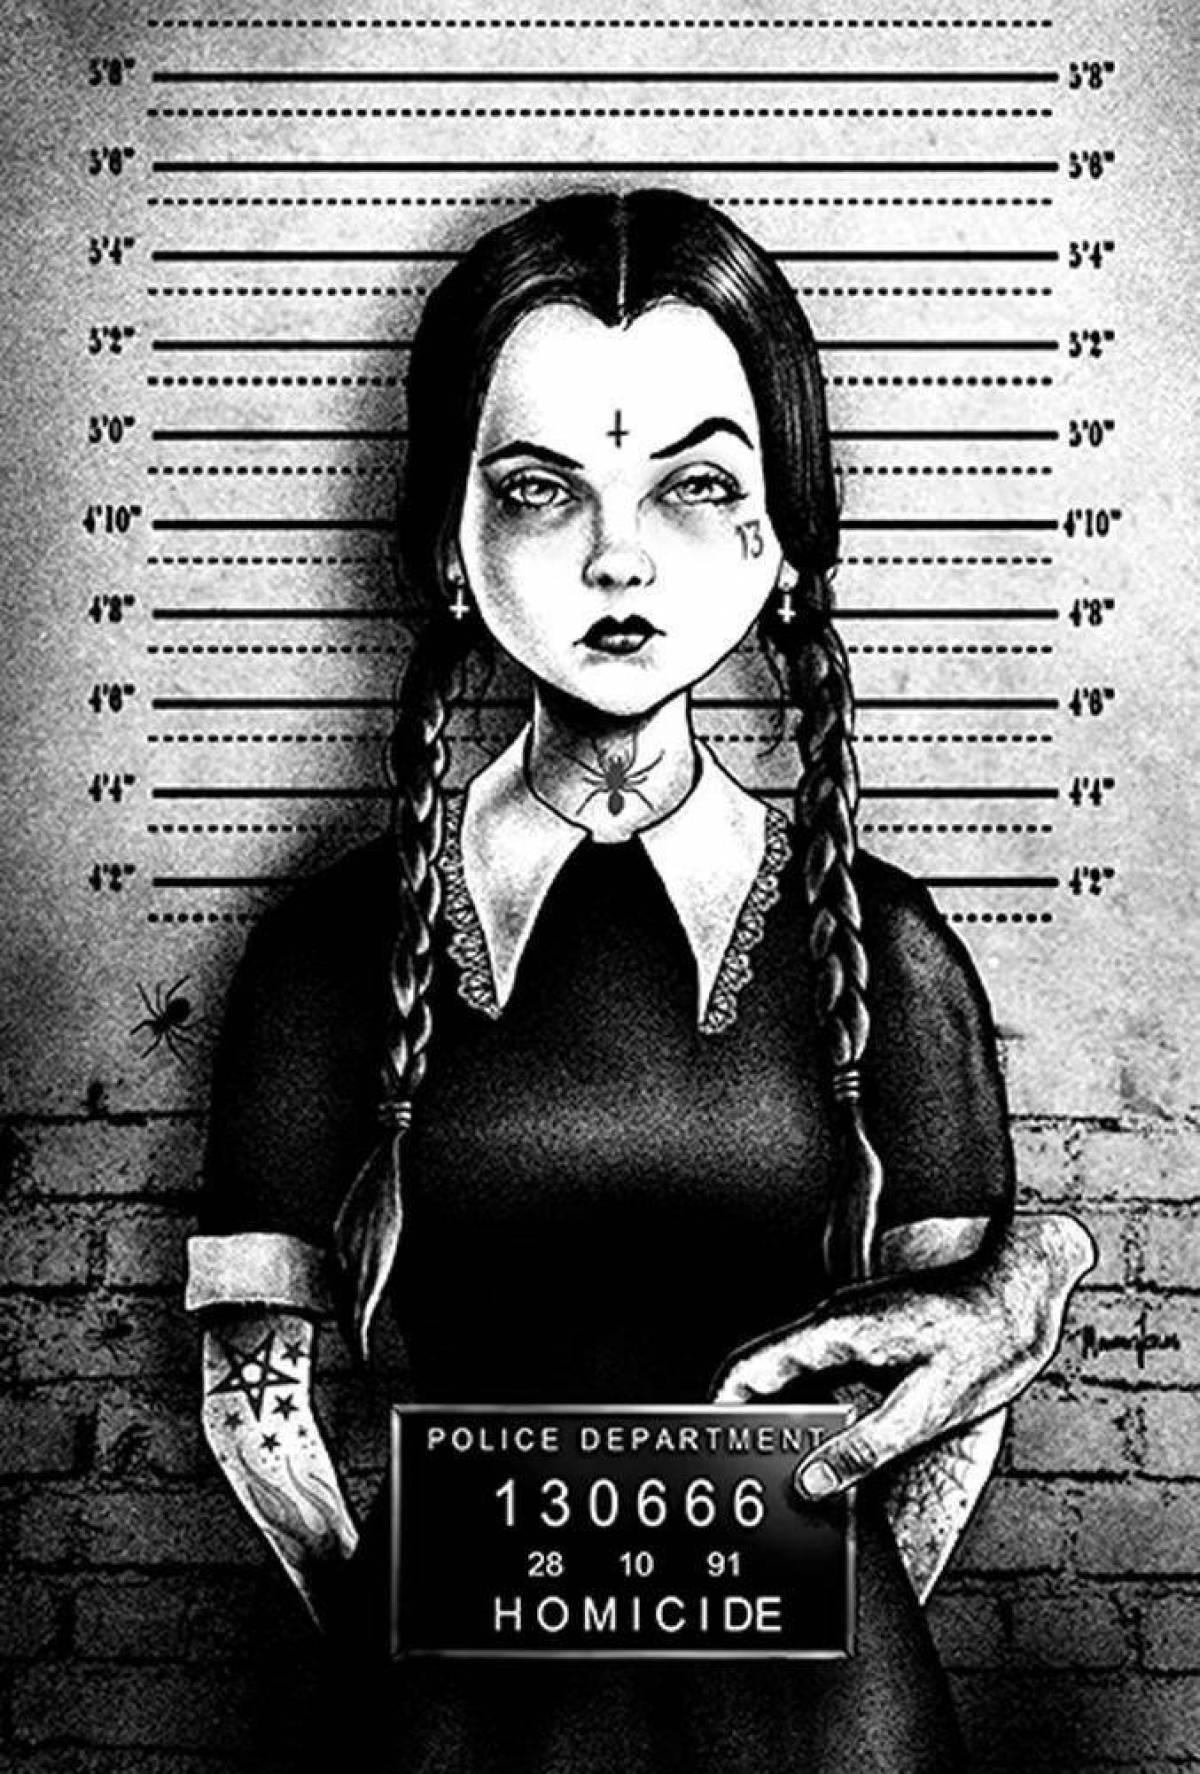 Wednesday Addams' awesome coloring book from 2022 series